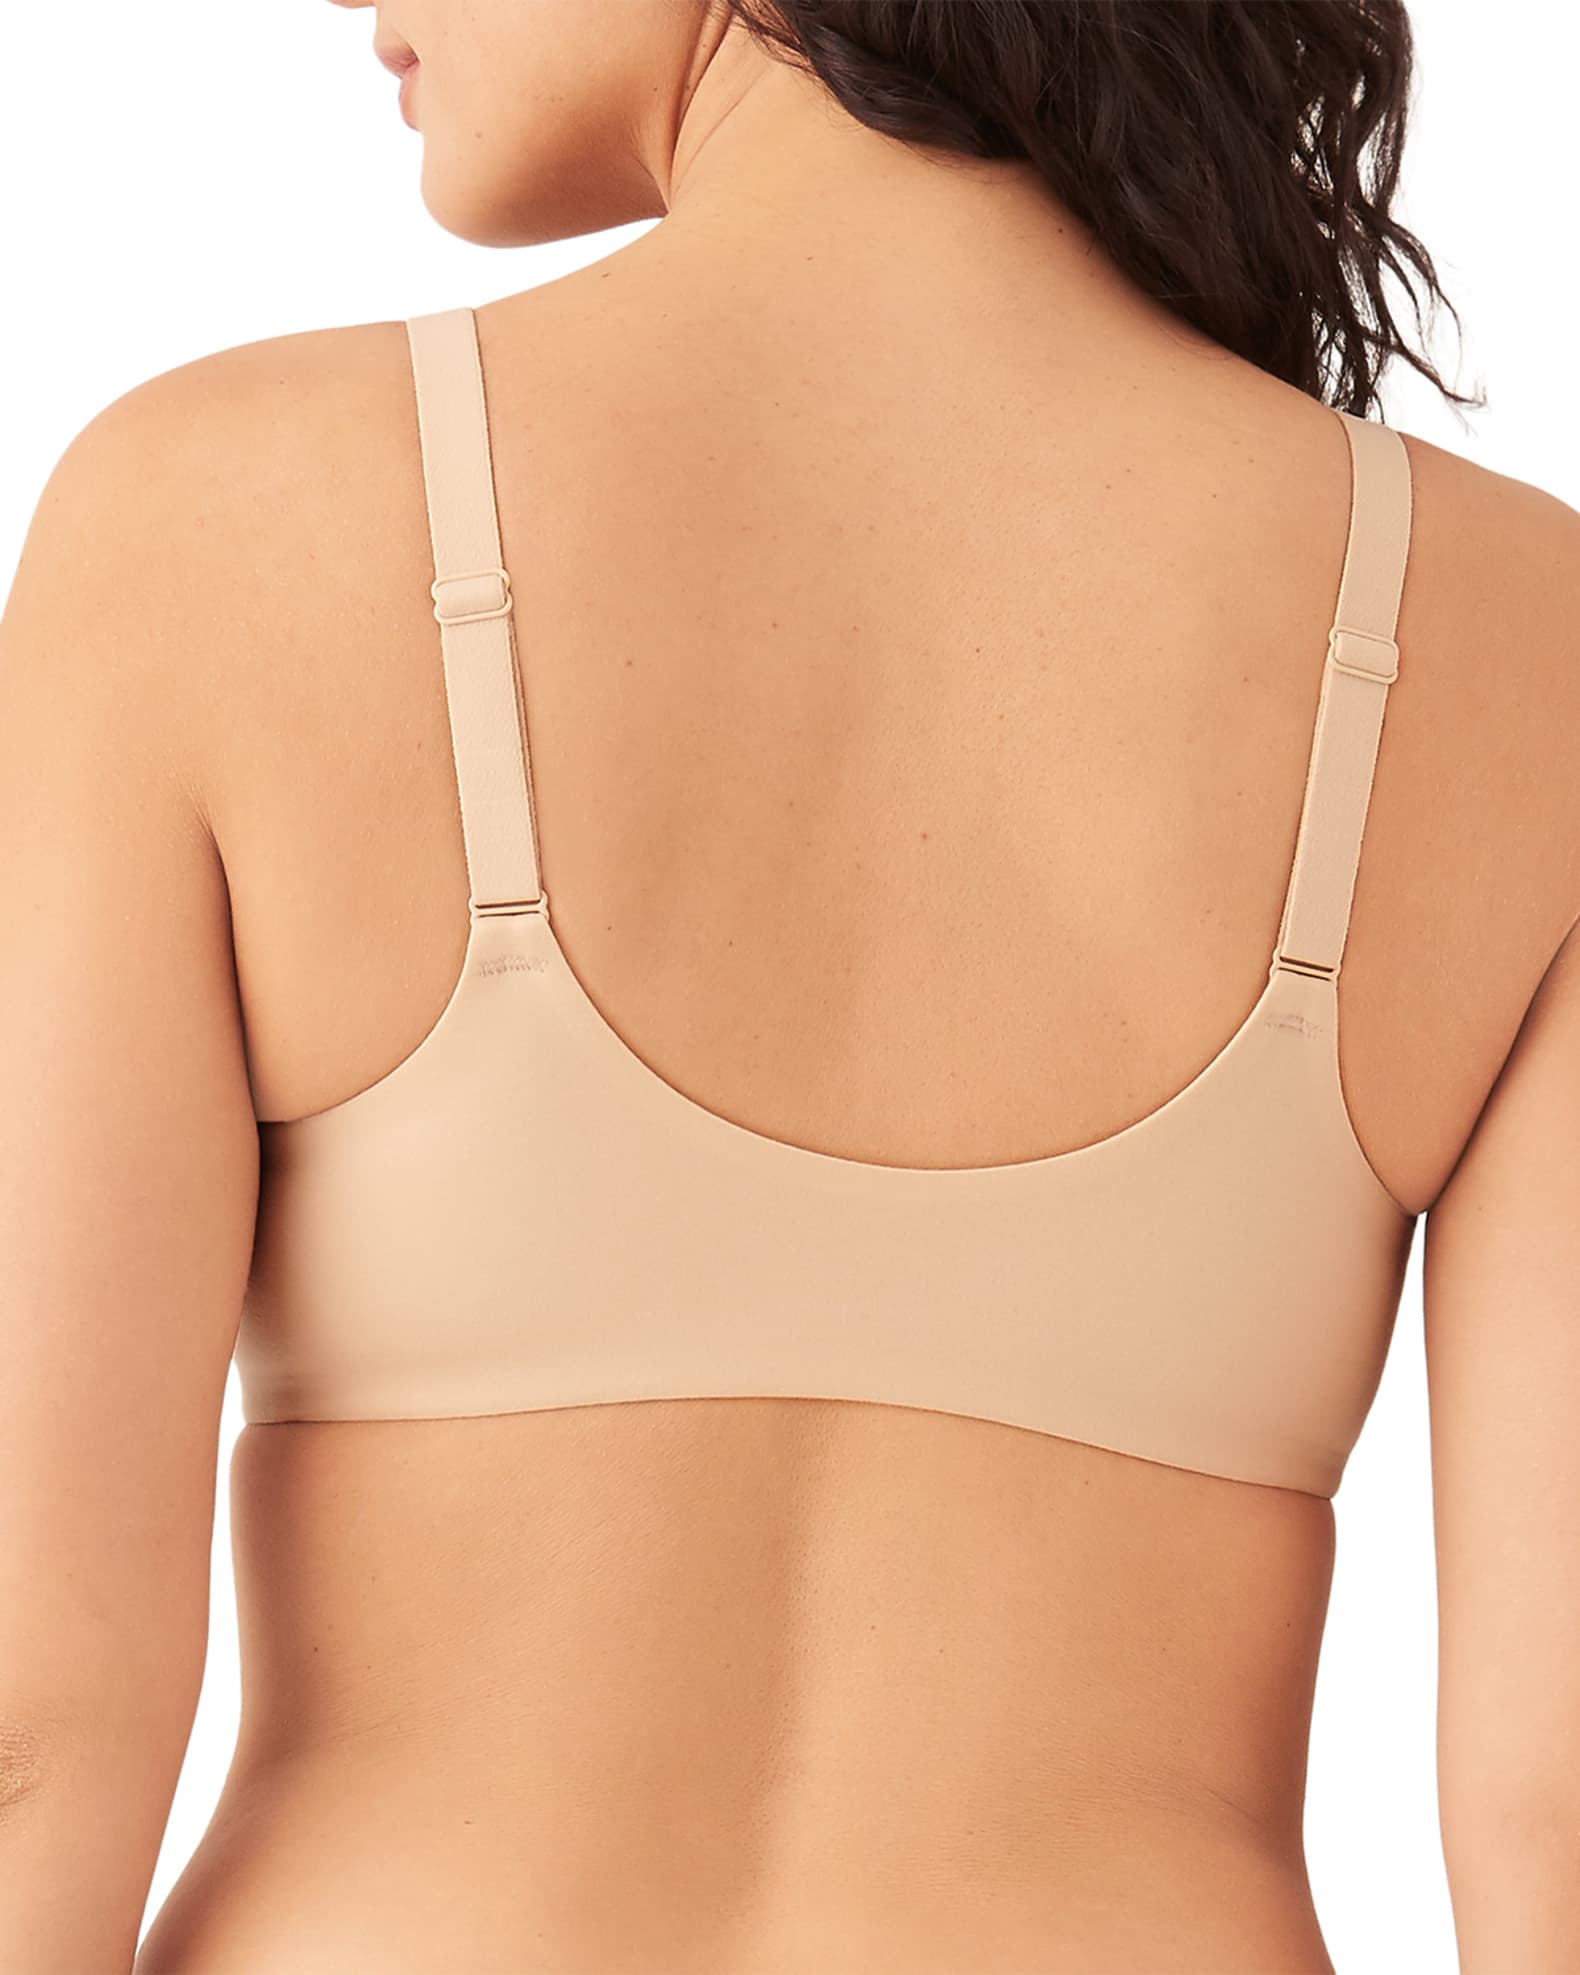 Shape Revelation®: Women's Bras and Shapewear Engineered For Your